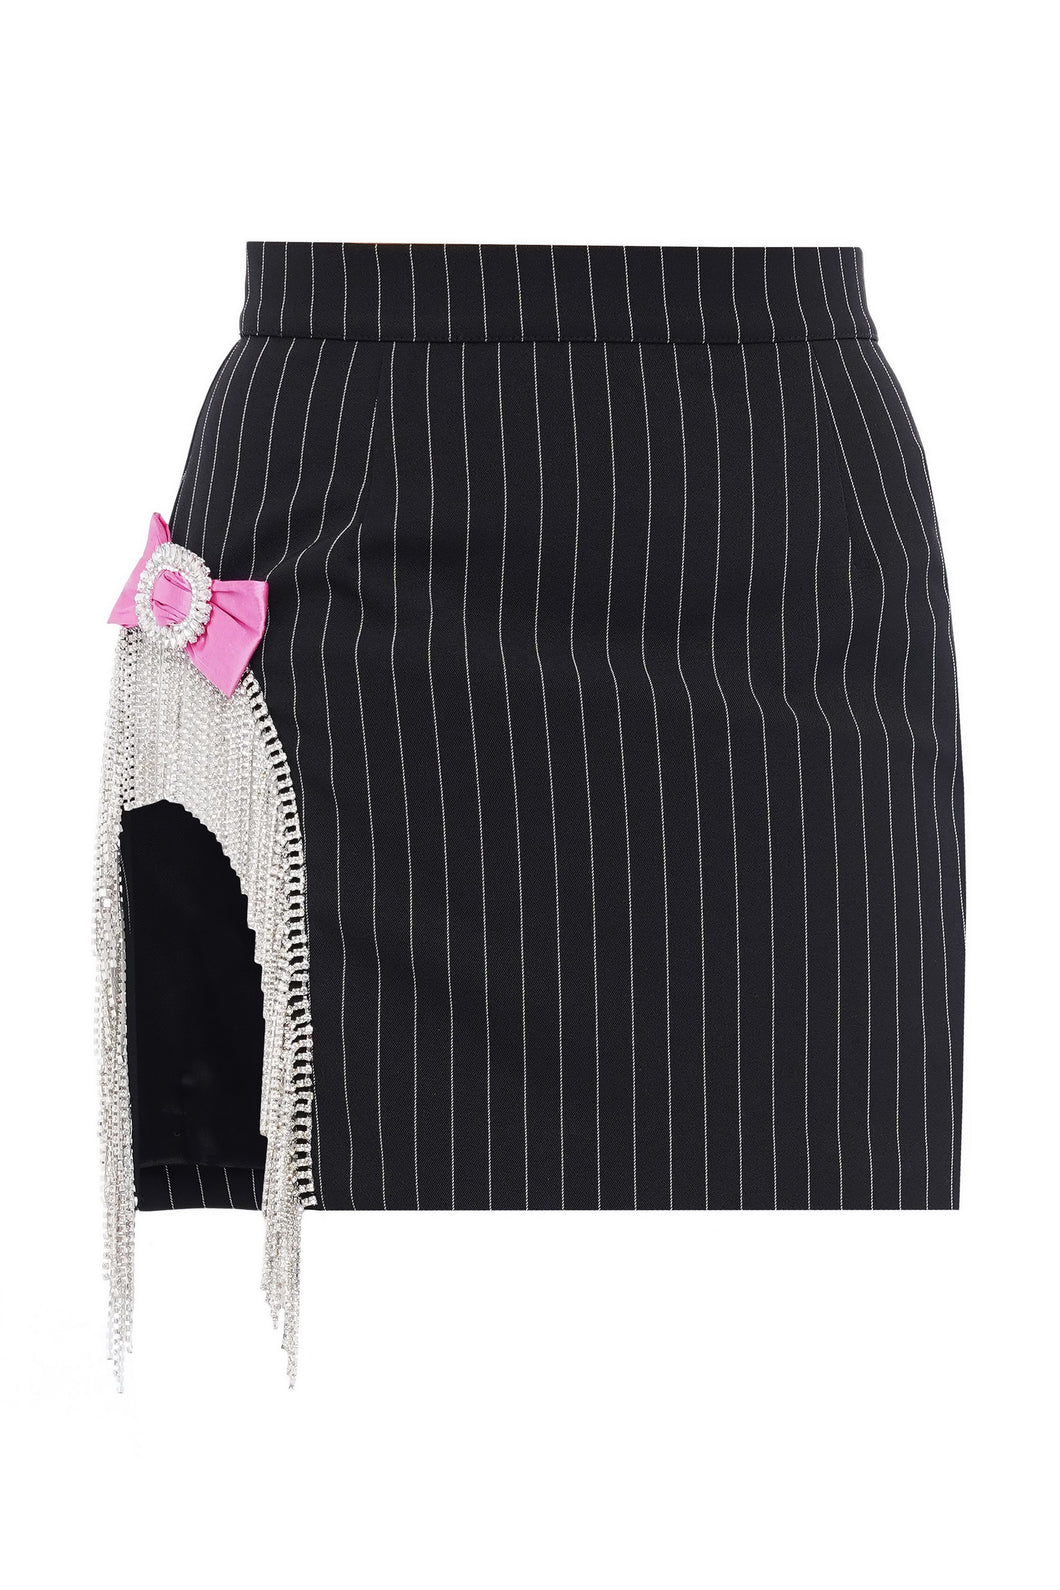 Mini skirt with crystal fringe and bow brooch